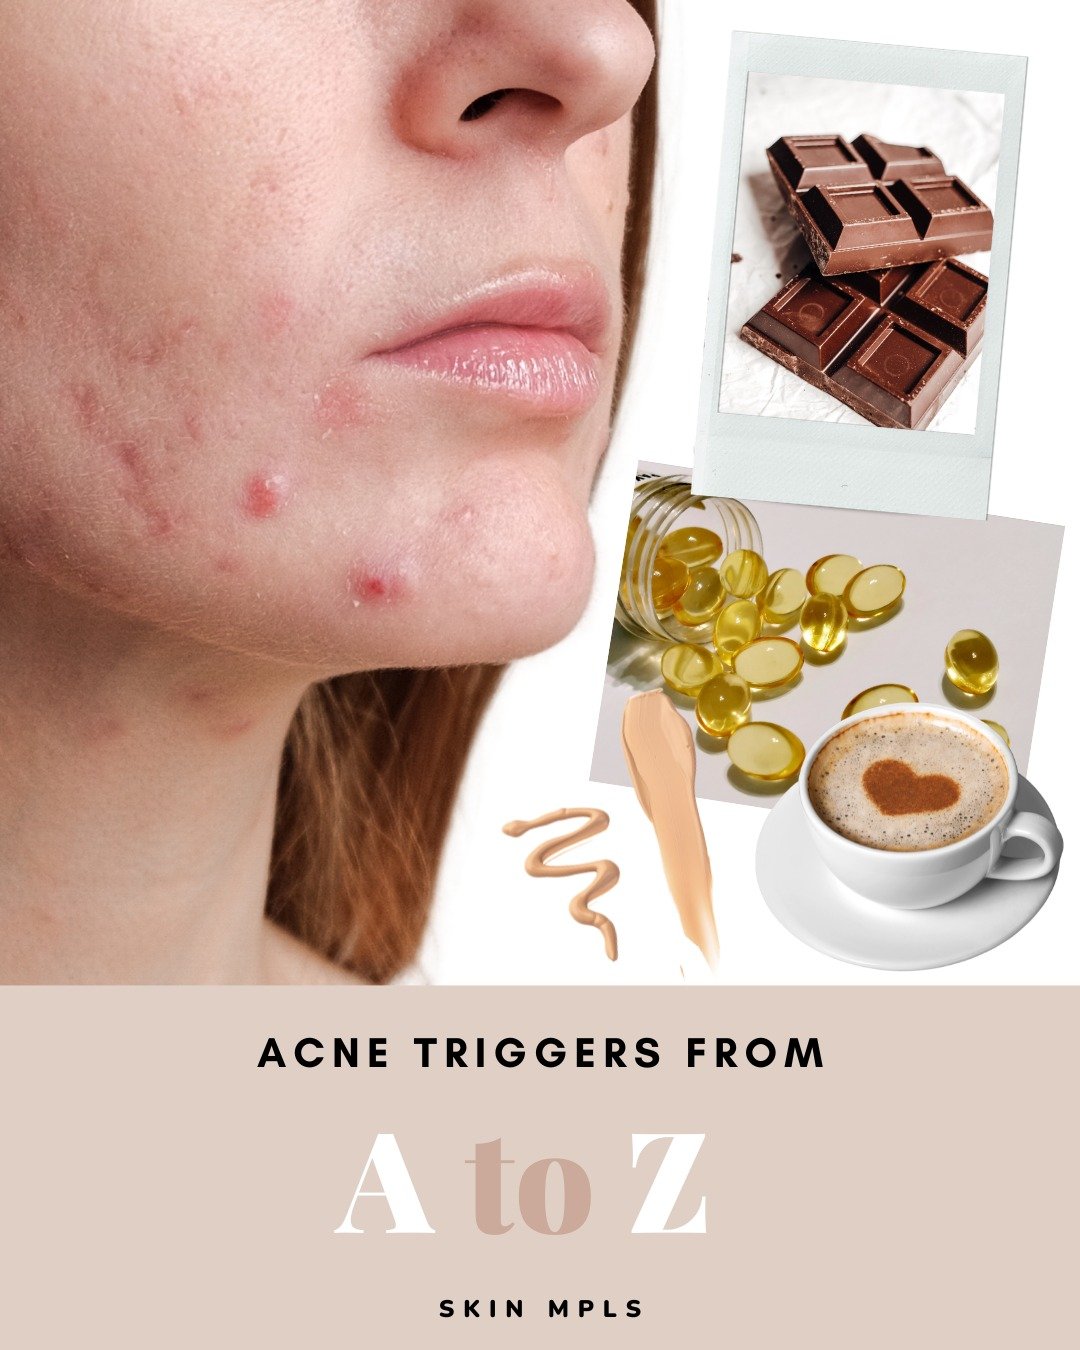 As we mentioned in our post yesterday, internal and external things can trigger acne, from inflammatory foods to pore-cloggers&mdash;the list can go on and on! But have no fear; we at #SKINMPLS have made a list of things to watch out for. 

Remember,